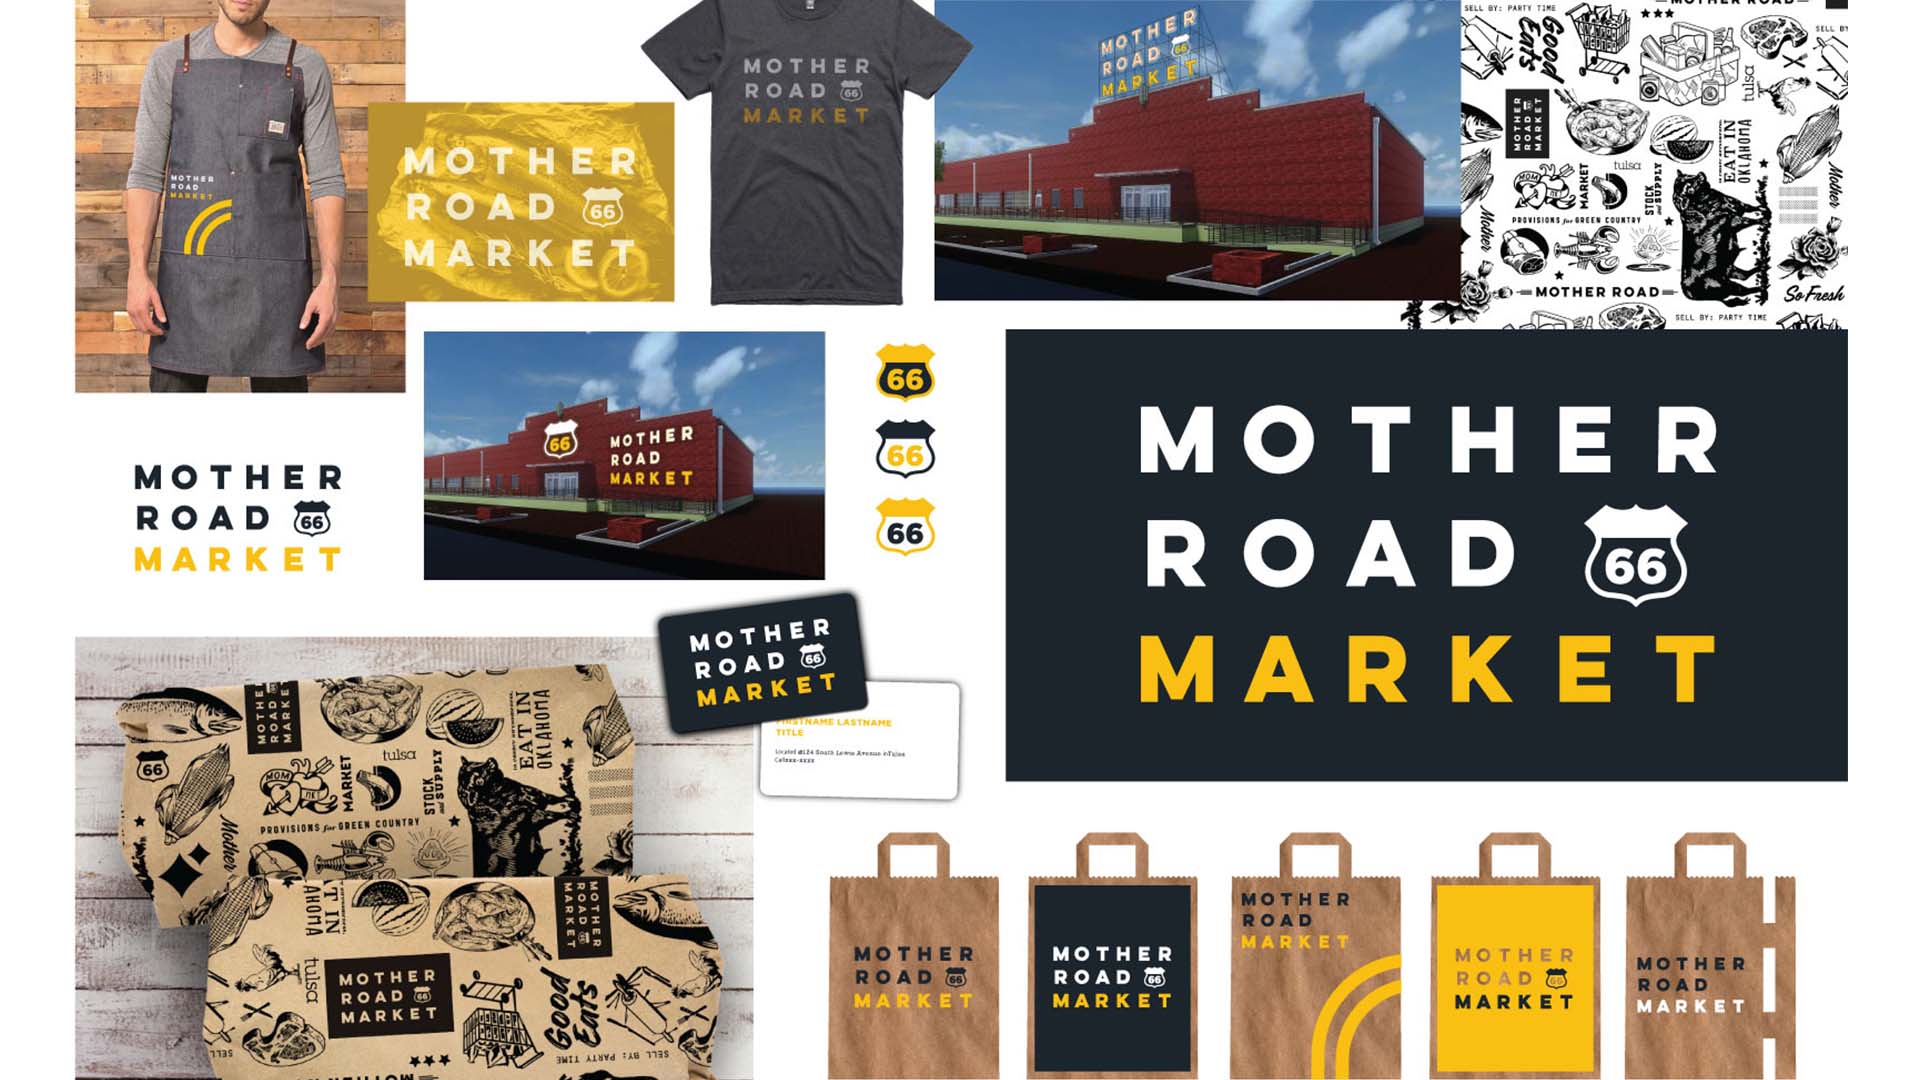 Branding and creative for Mother Road Market in Tulsa, Oklahoma